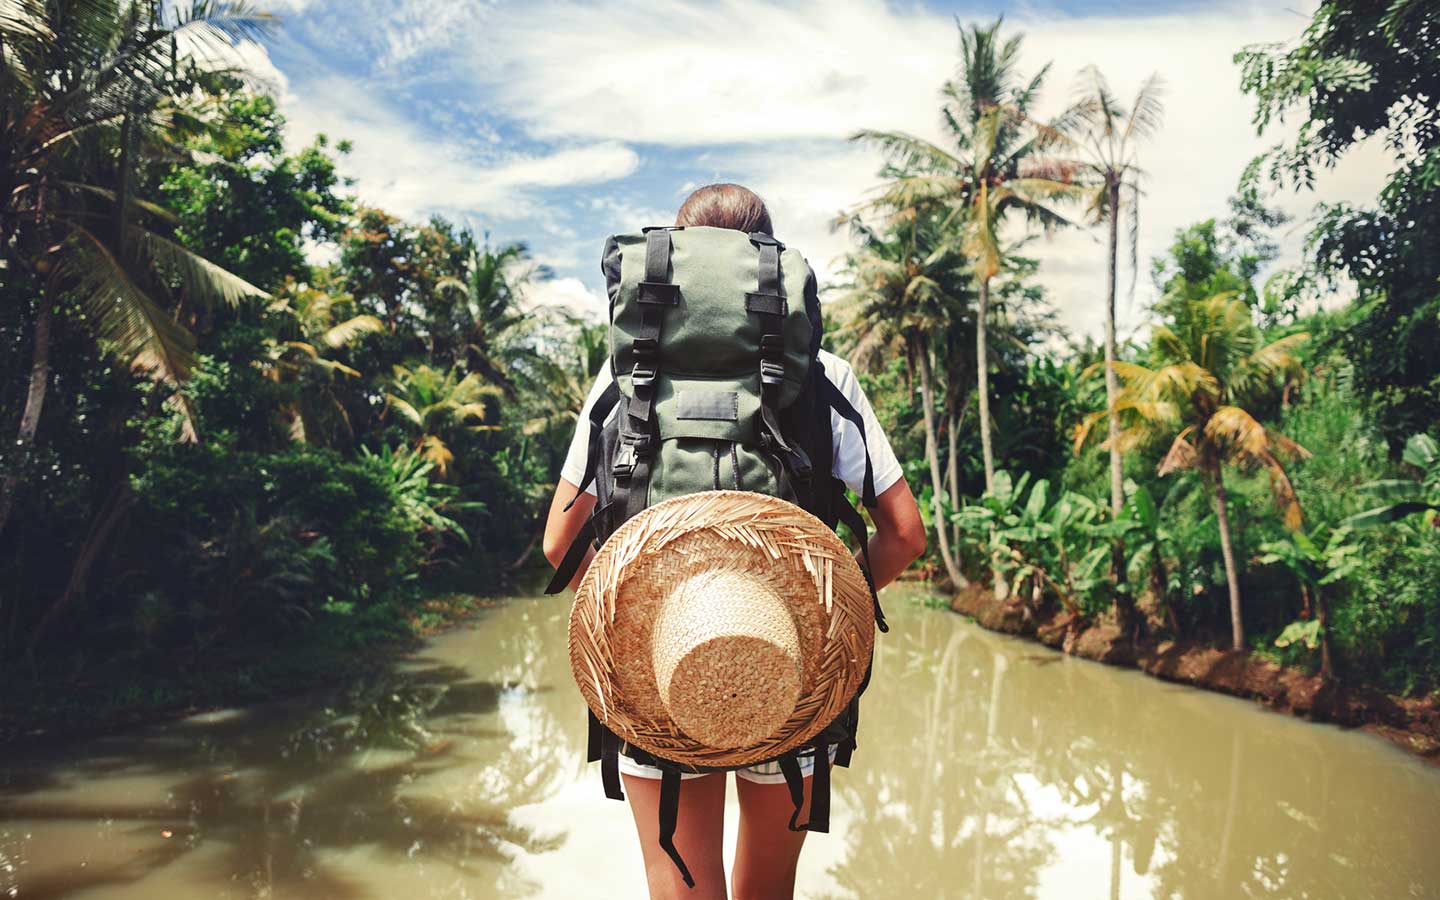 gap year travel meaning